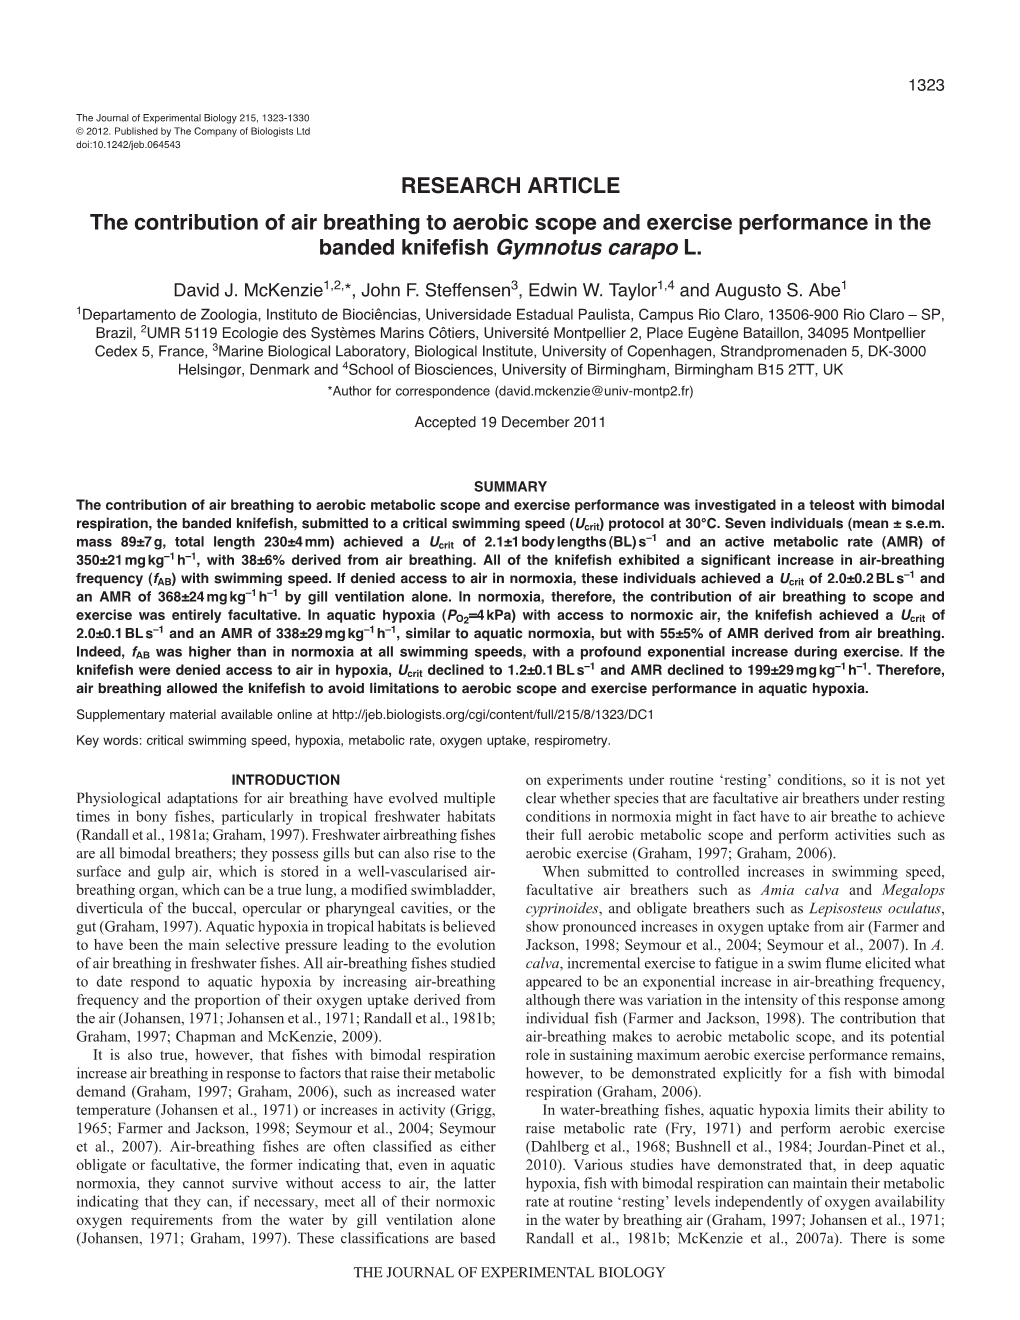 RESEARCH ARTICLE the Contribution of Air Breathing to Aerobic Scope and Exercise Performance in the Banded Knifefish Gymnotus Carapo L